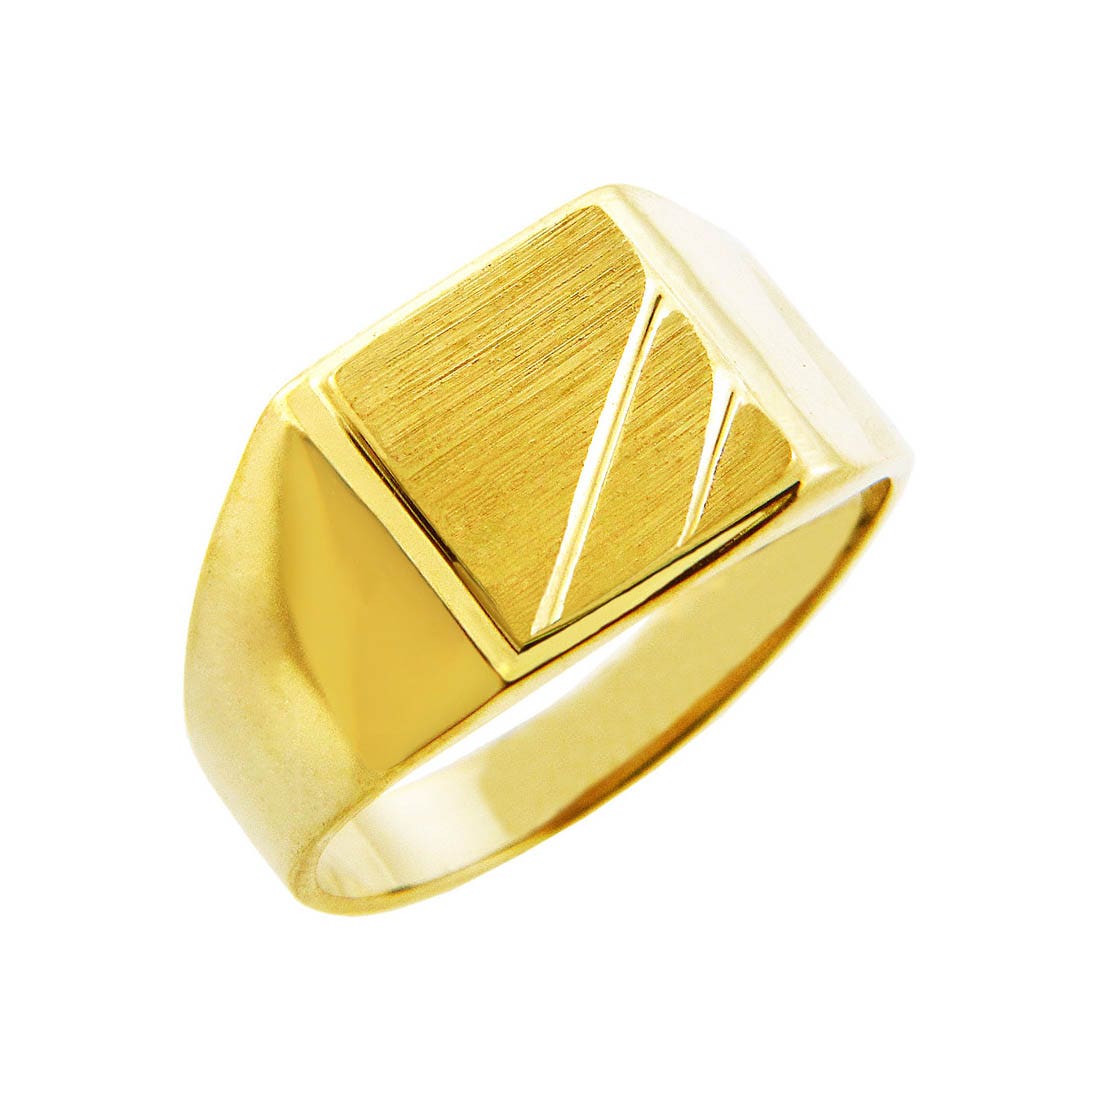 Gold - Mens Ring - Gold Boutique GOOFASH